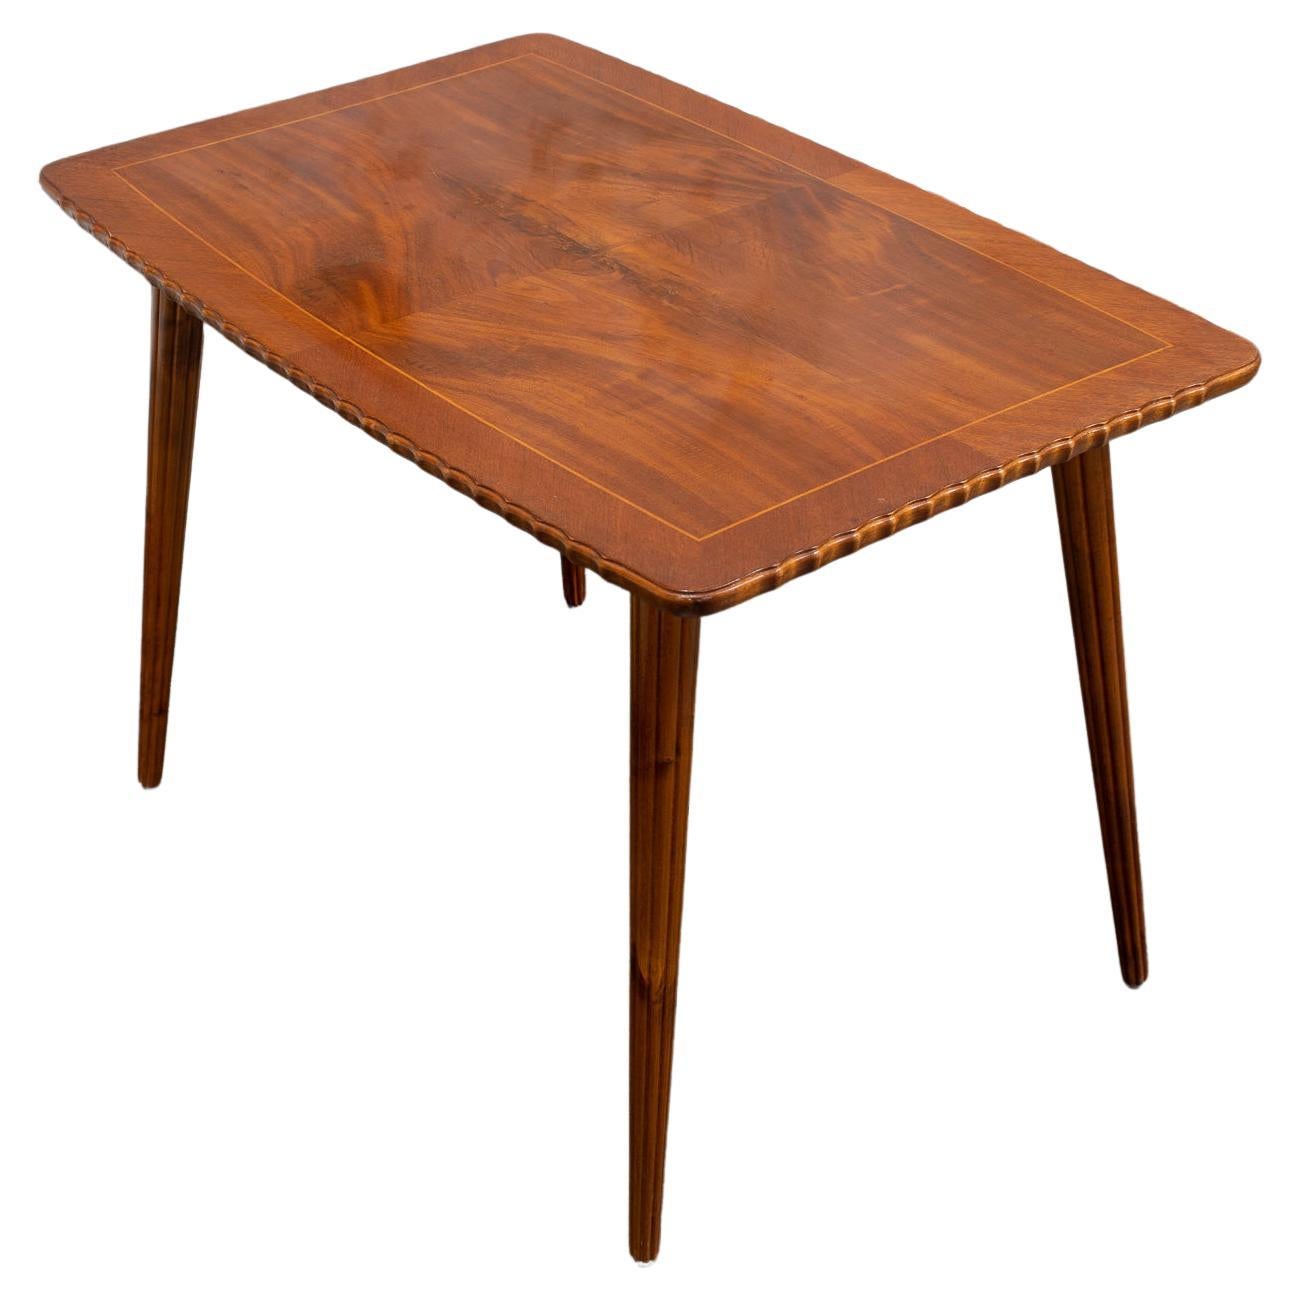 Coffee Table with Fluted Edge in Crotch Mahogany, 1940's Sweden For Sale